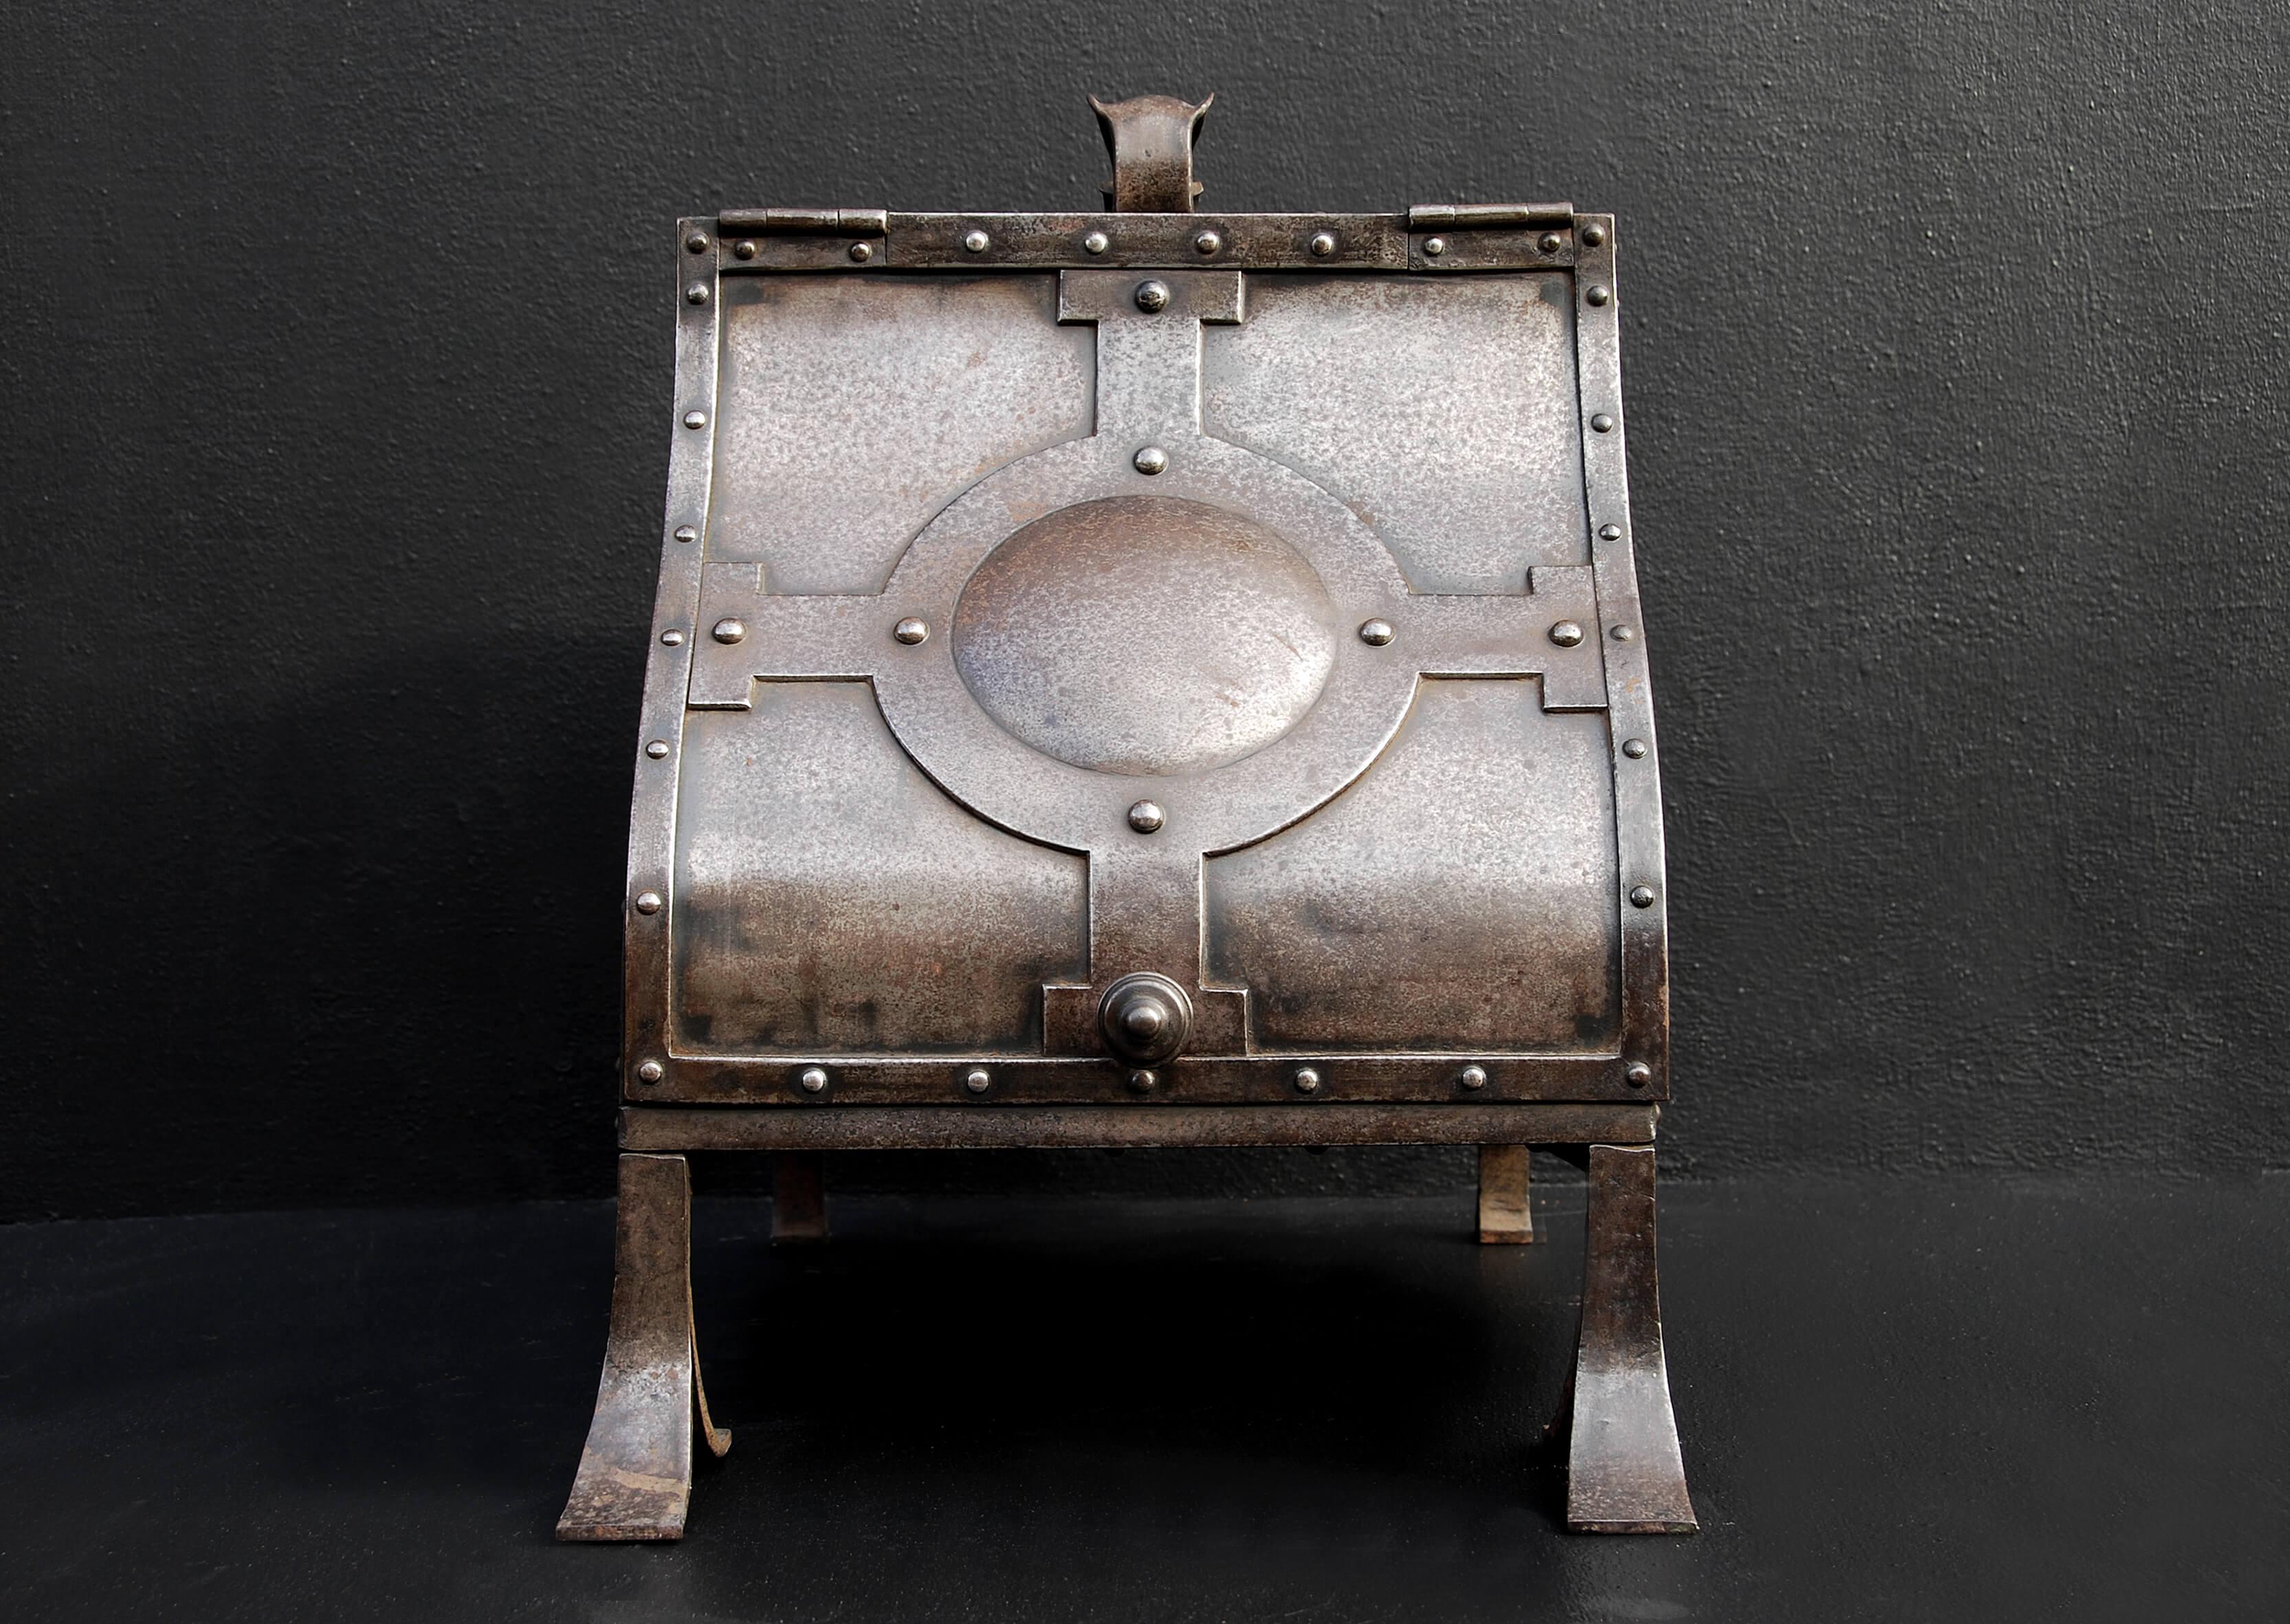 An unusual English antique coal box. This antique coal box/scuttle is made in steel and dates from around 1900. The coal box is very well made and is heavy quality. A mildy Art Nouveau influence can be seen. Complete with a liner. The overall